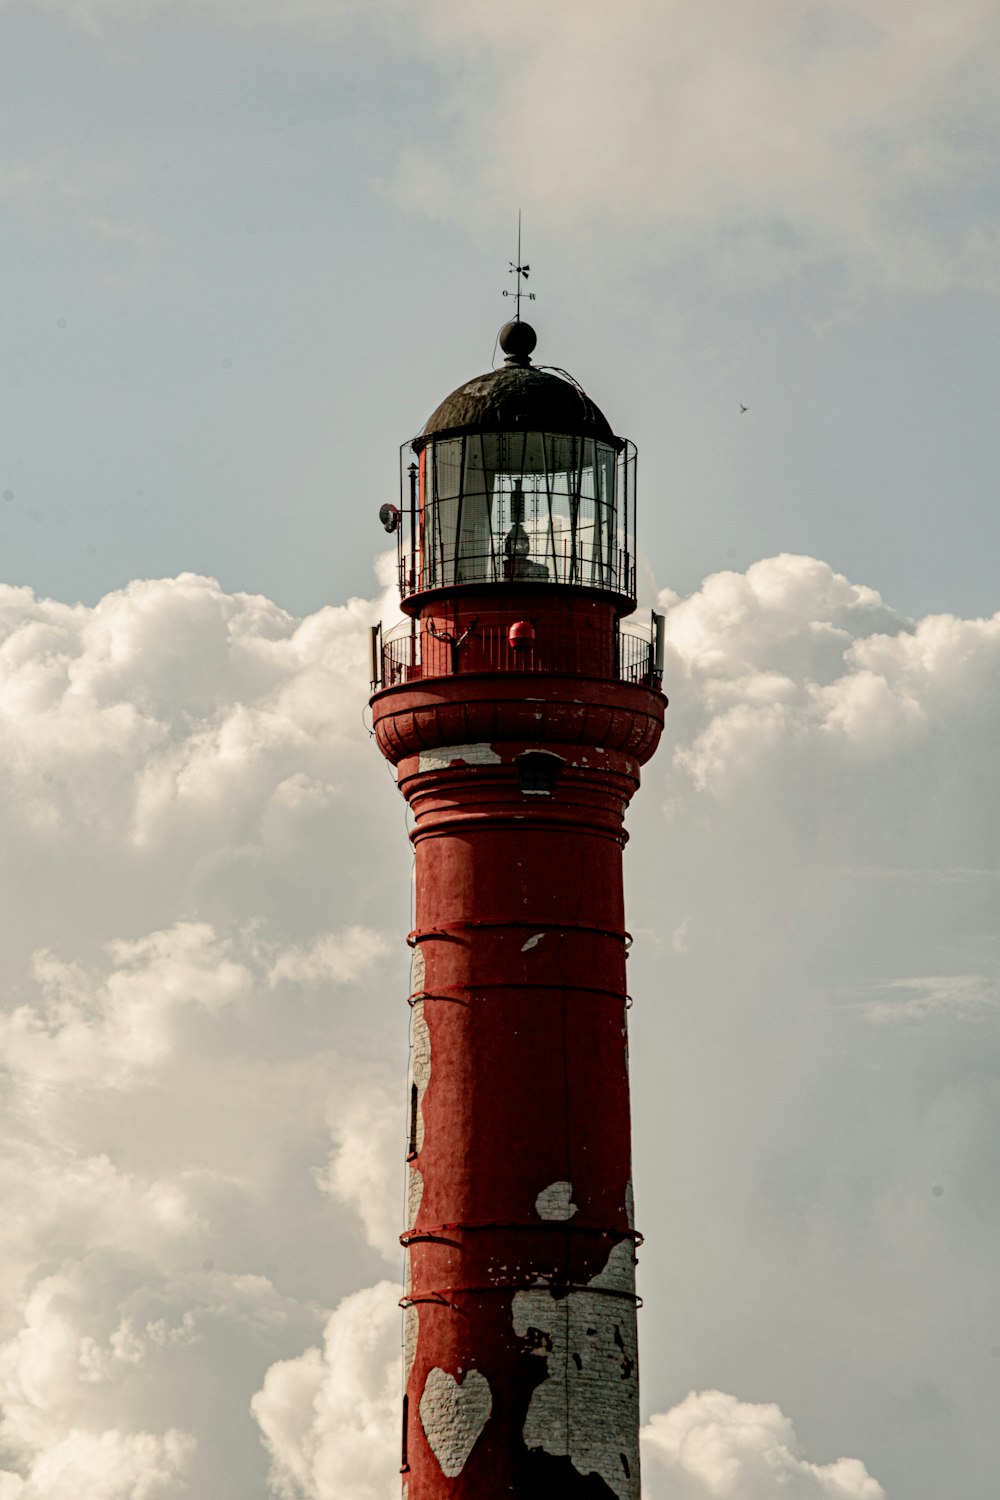 a red light house in the middle of a cloudy sky